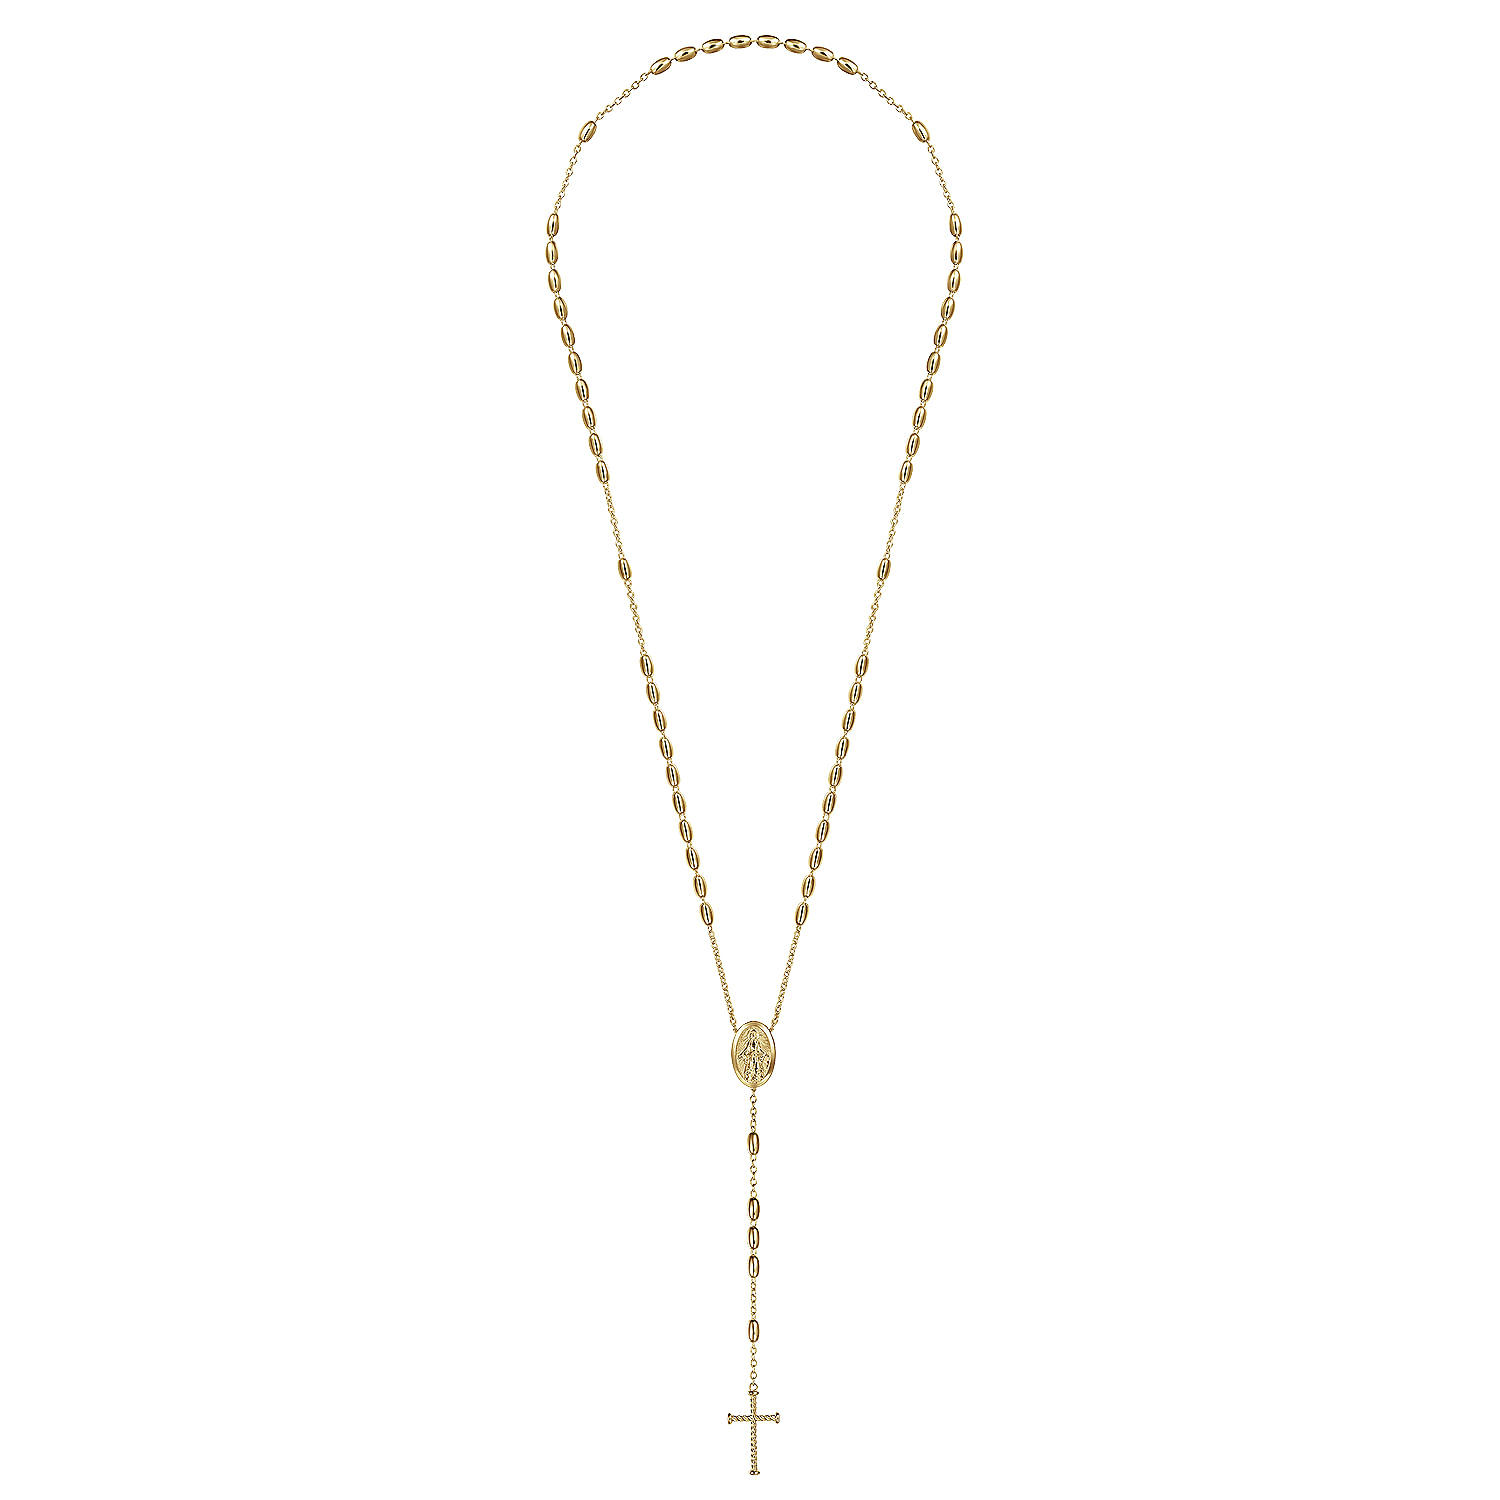 27 Inch 14K Yellow Gold Men's Rosary Solid Men's Chain Necklace